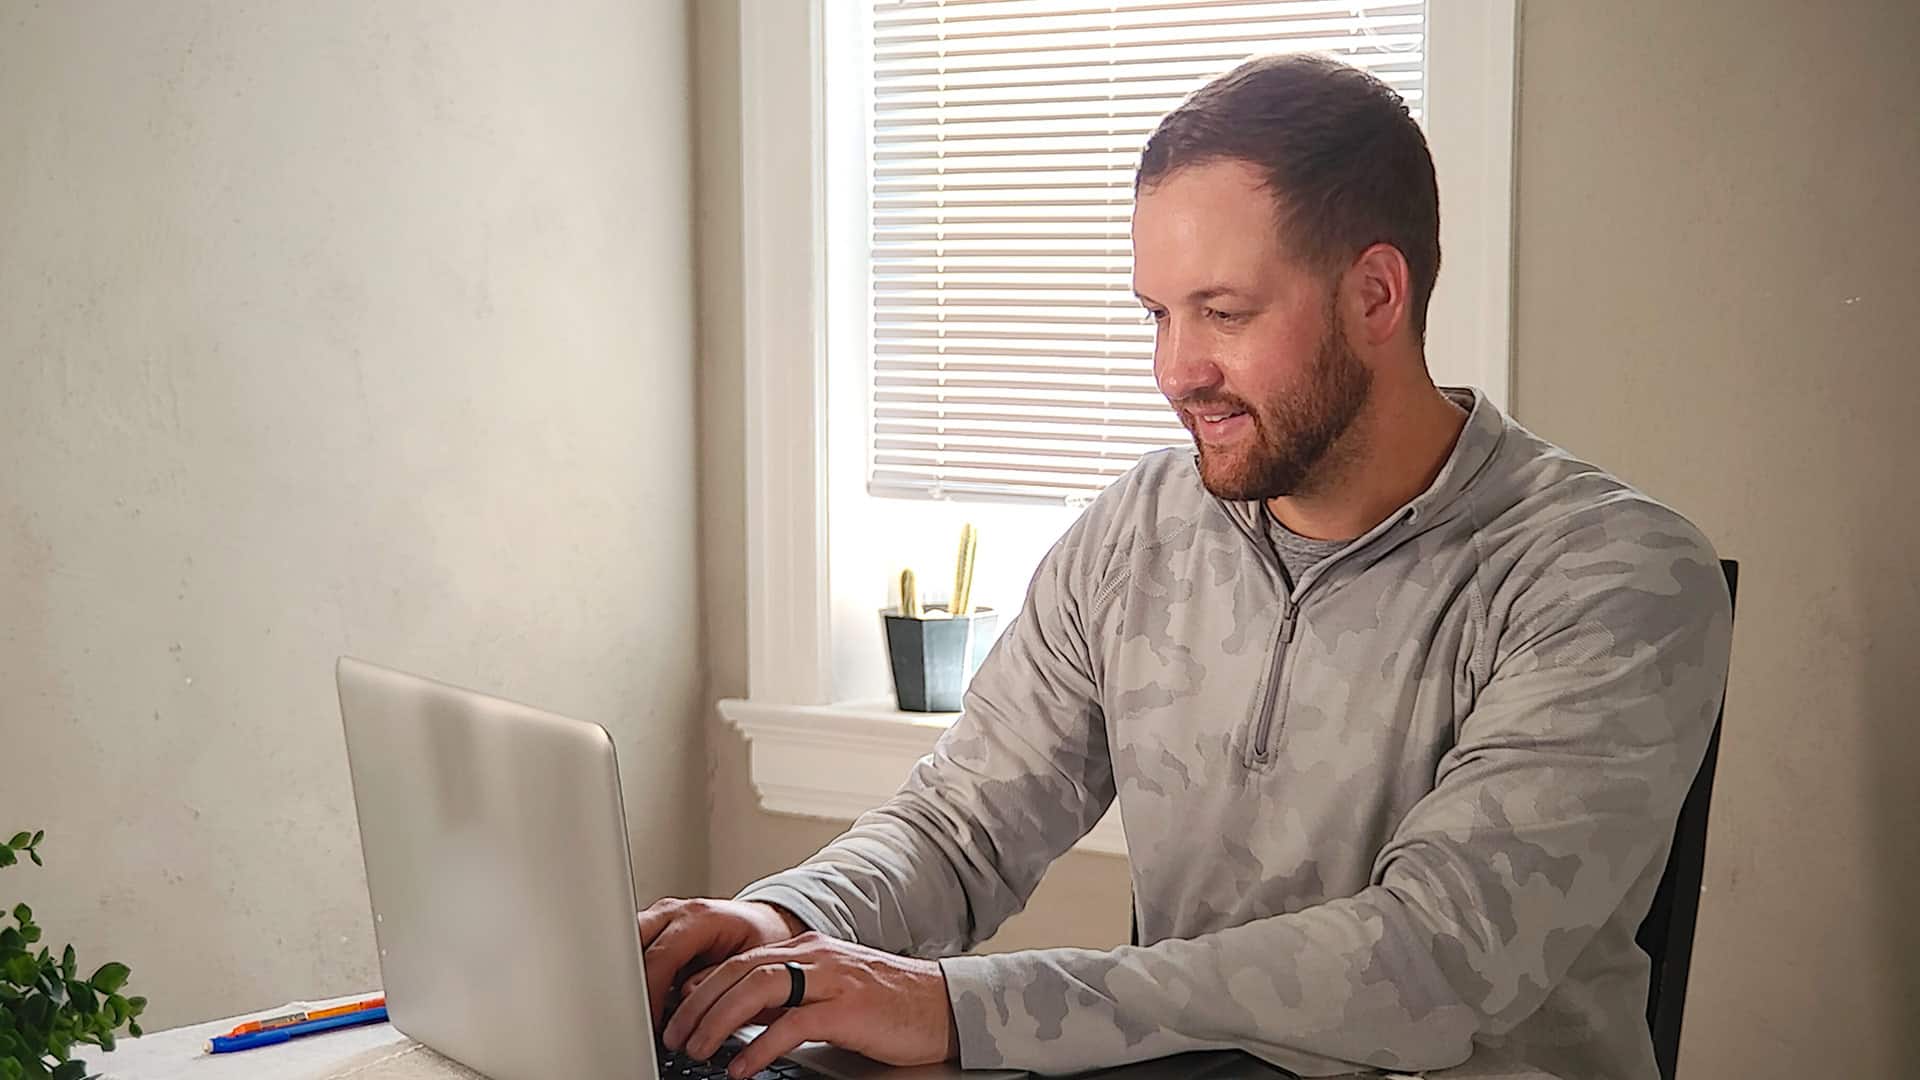 Wyatt Martensen, who earned his degree from SNHU in 2021, sitting at a table working on his computer with a  window covered by a white venitian blind in the background.